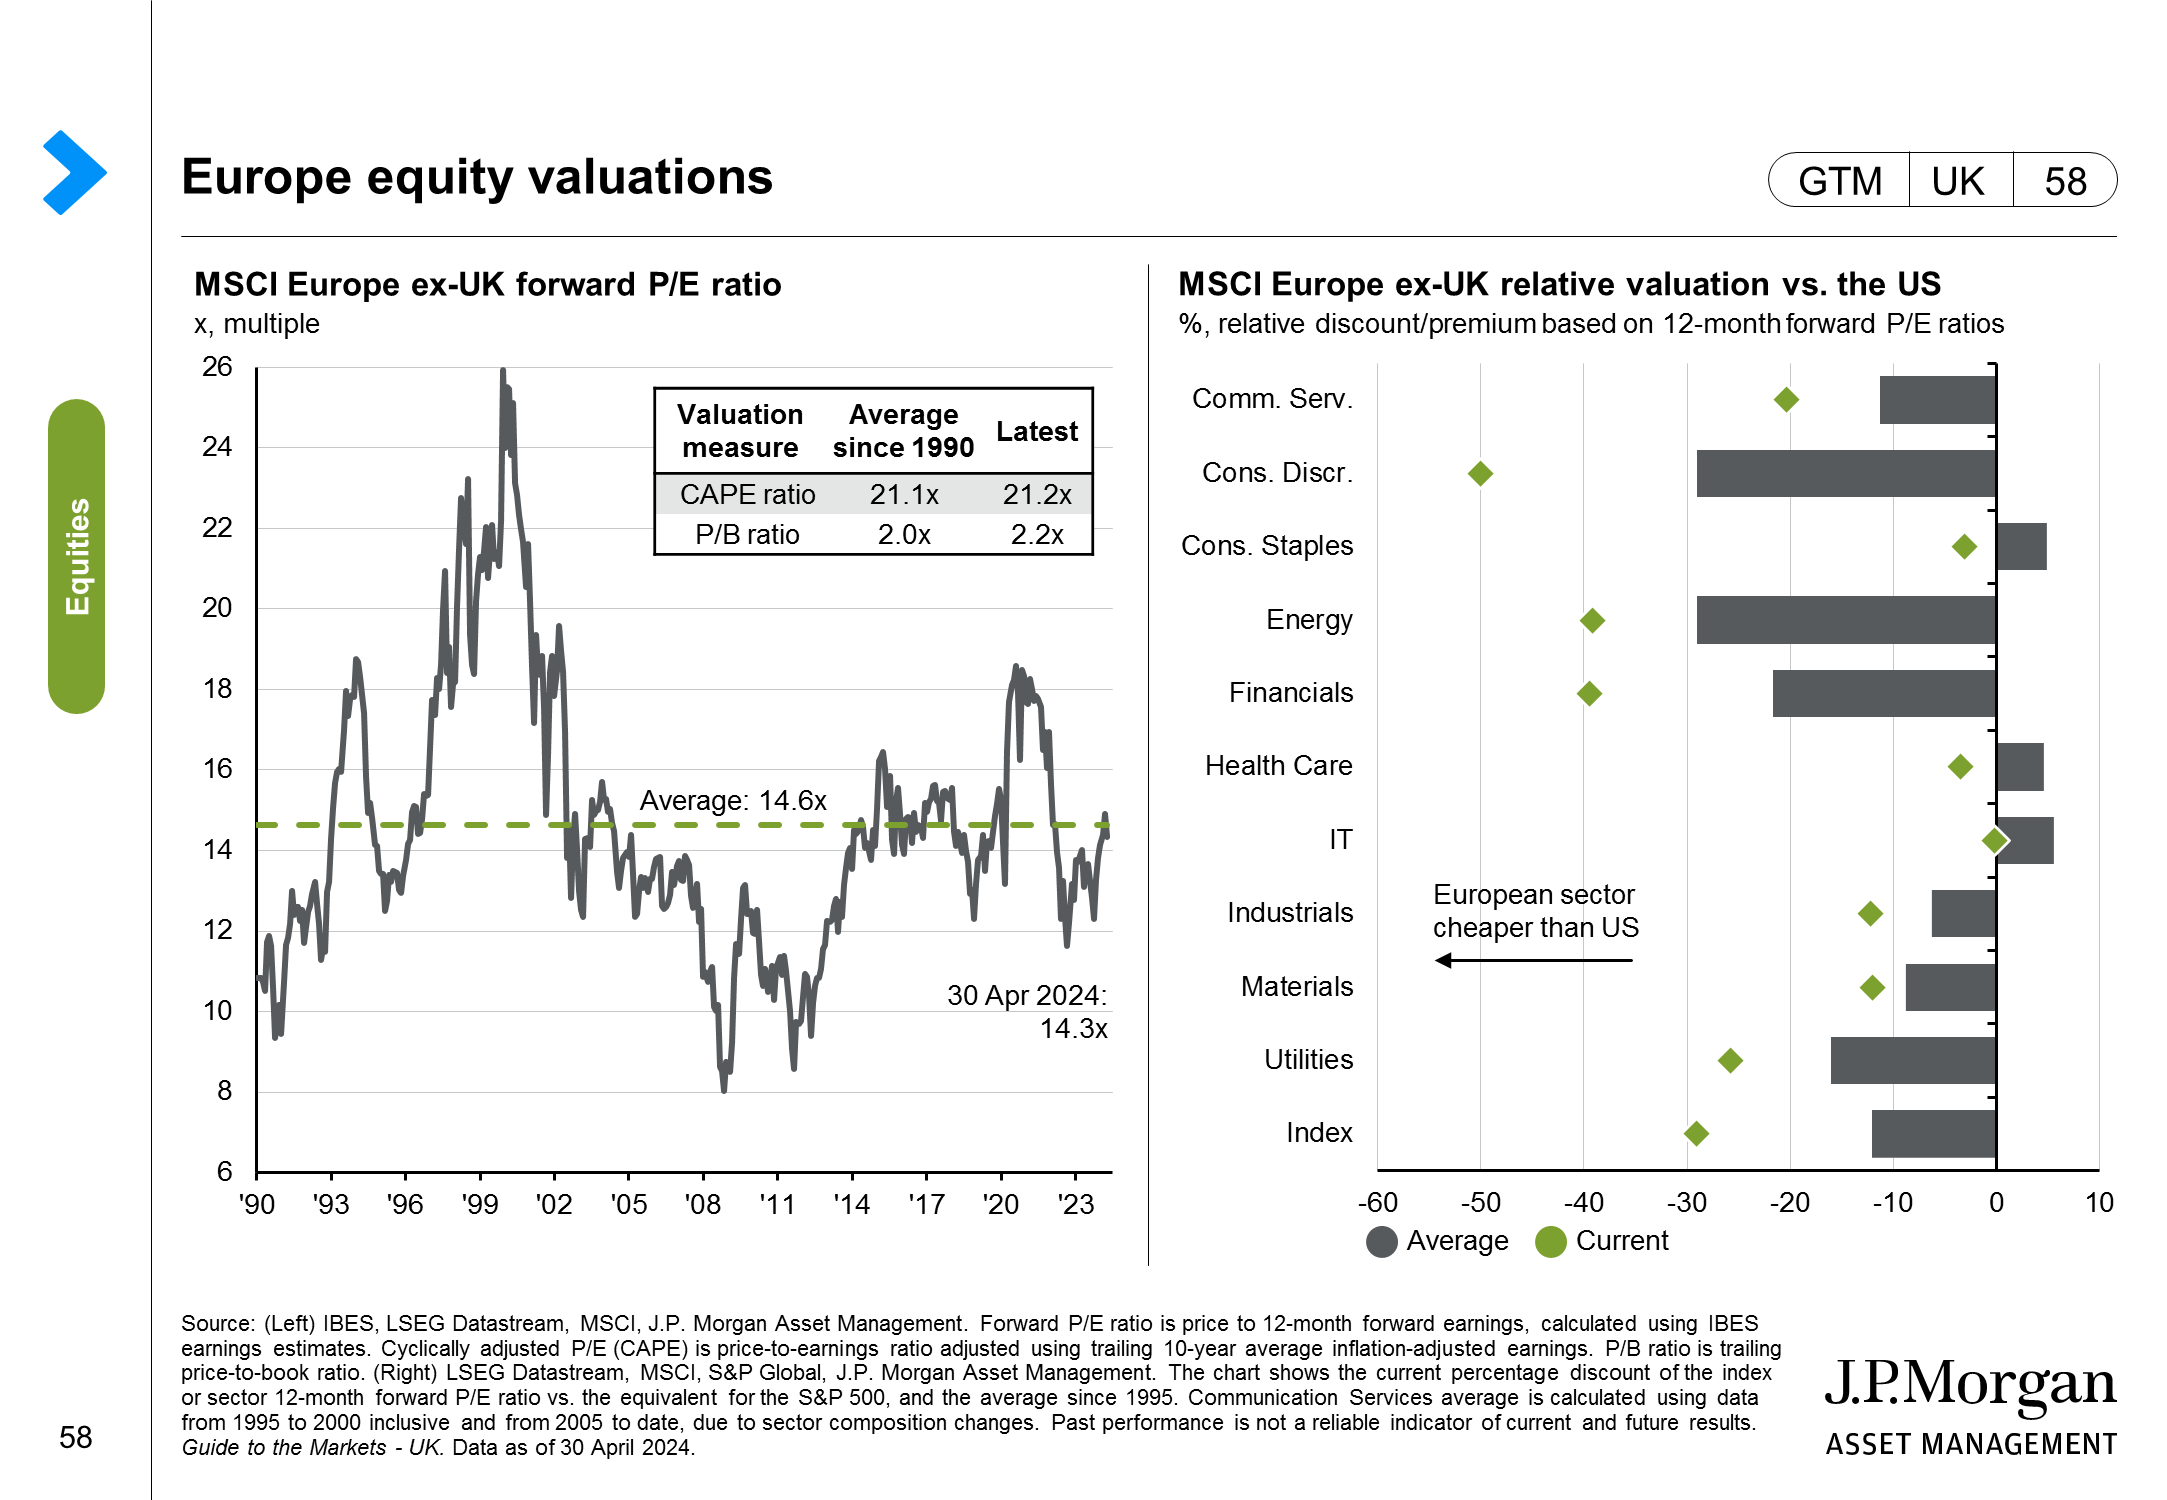 Europe ex-UK equity valuations and performance